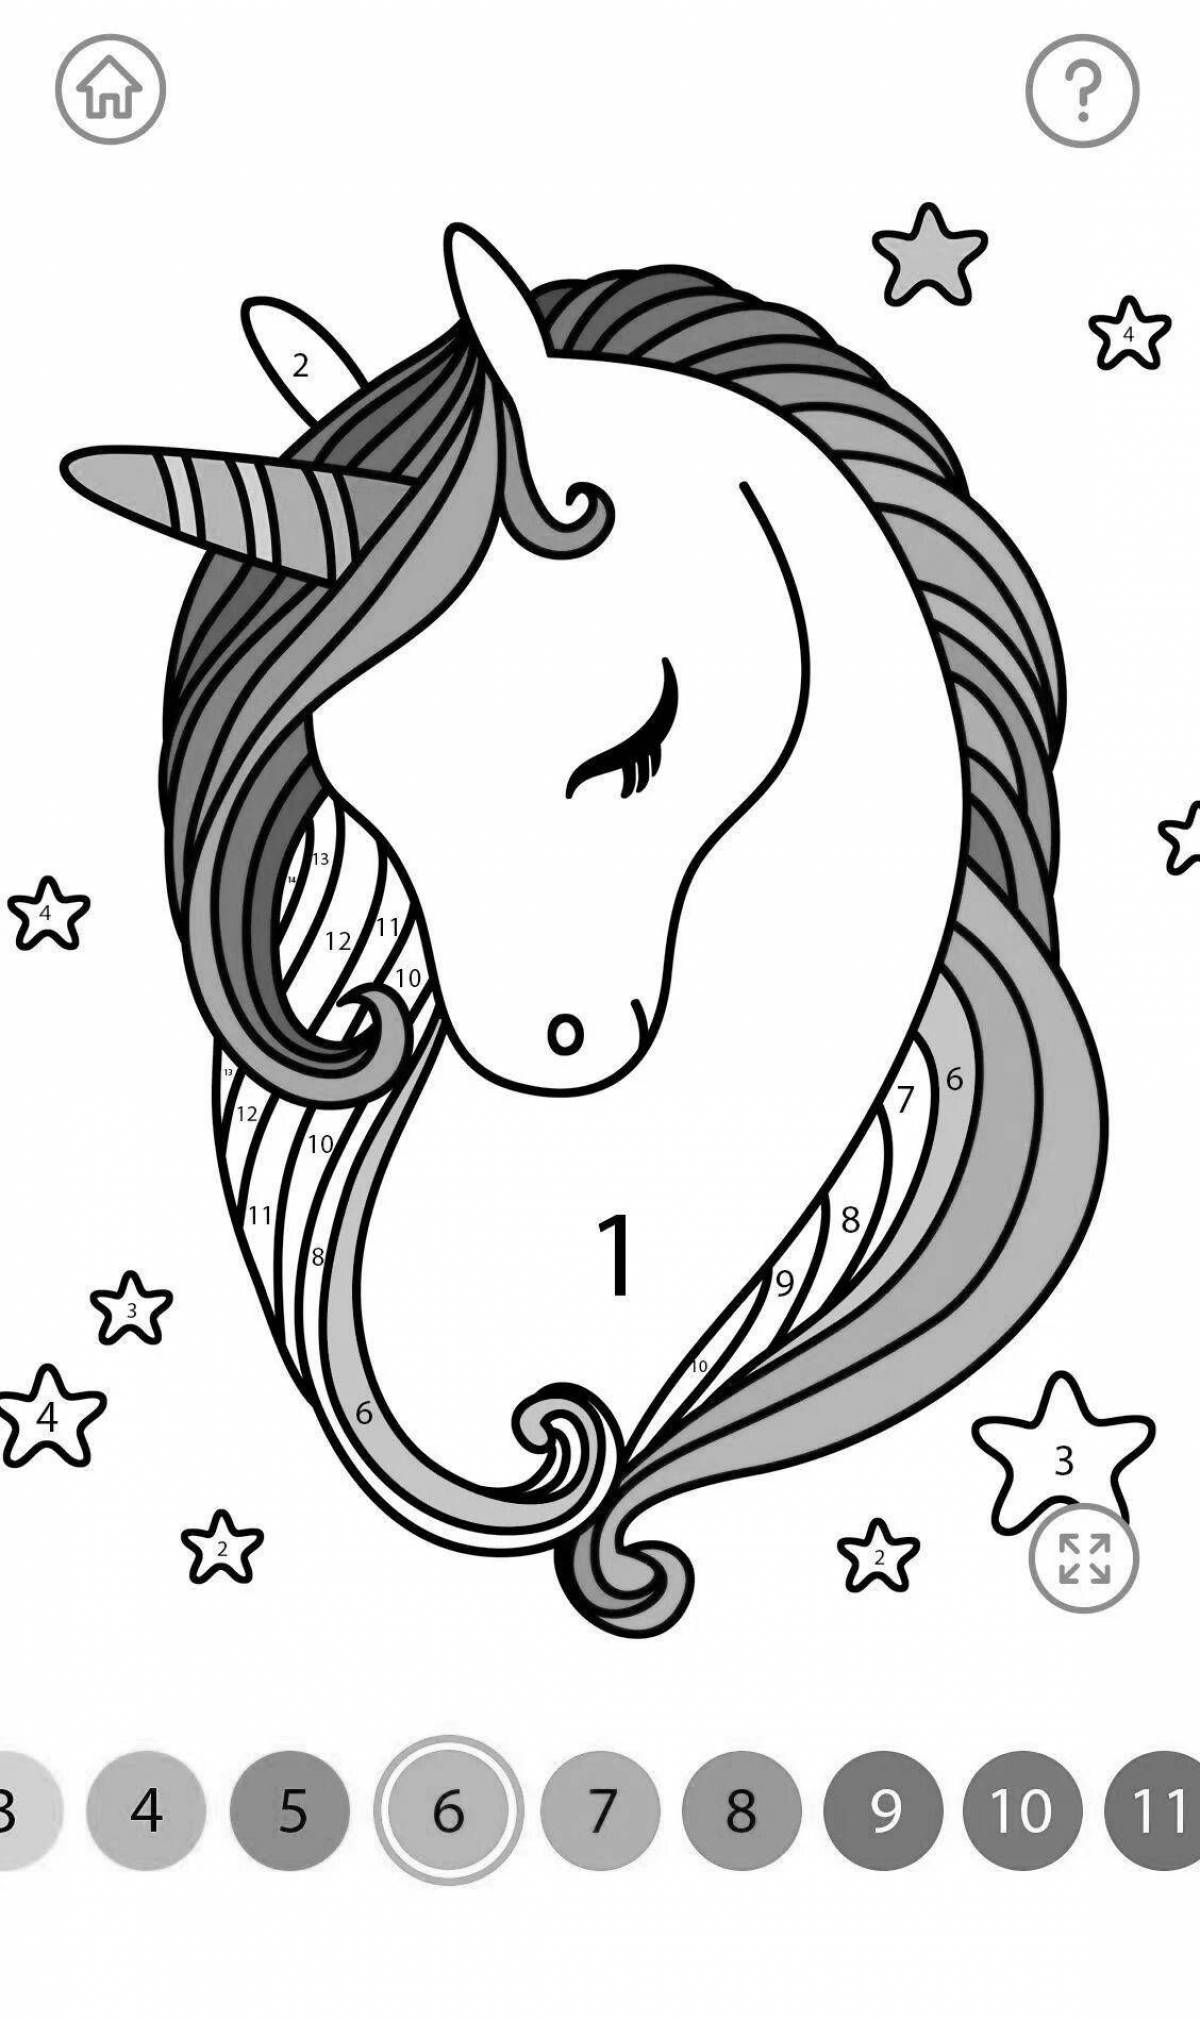 Radiant unicorn coloring by numbers for kids